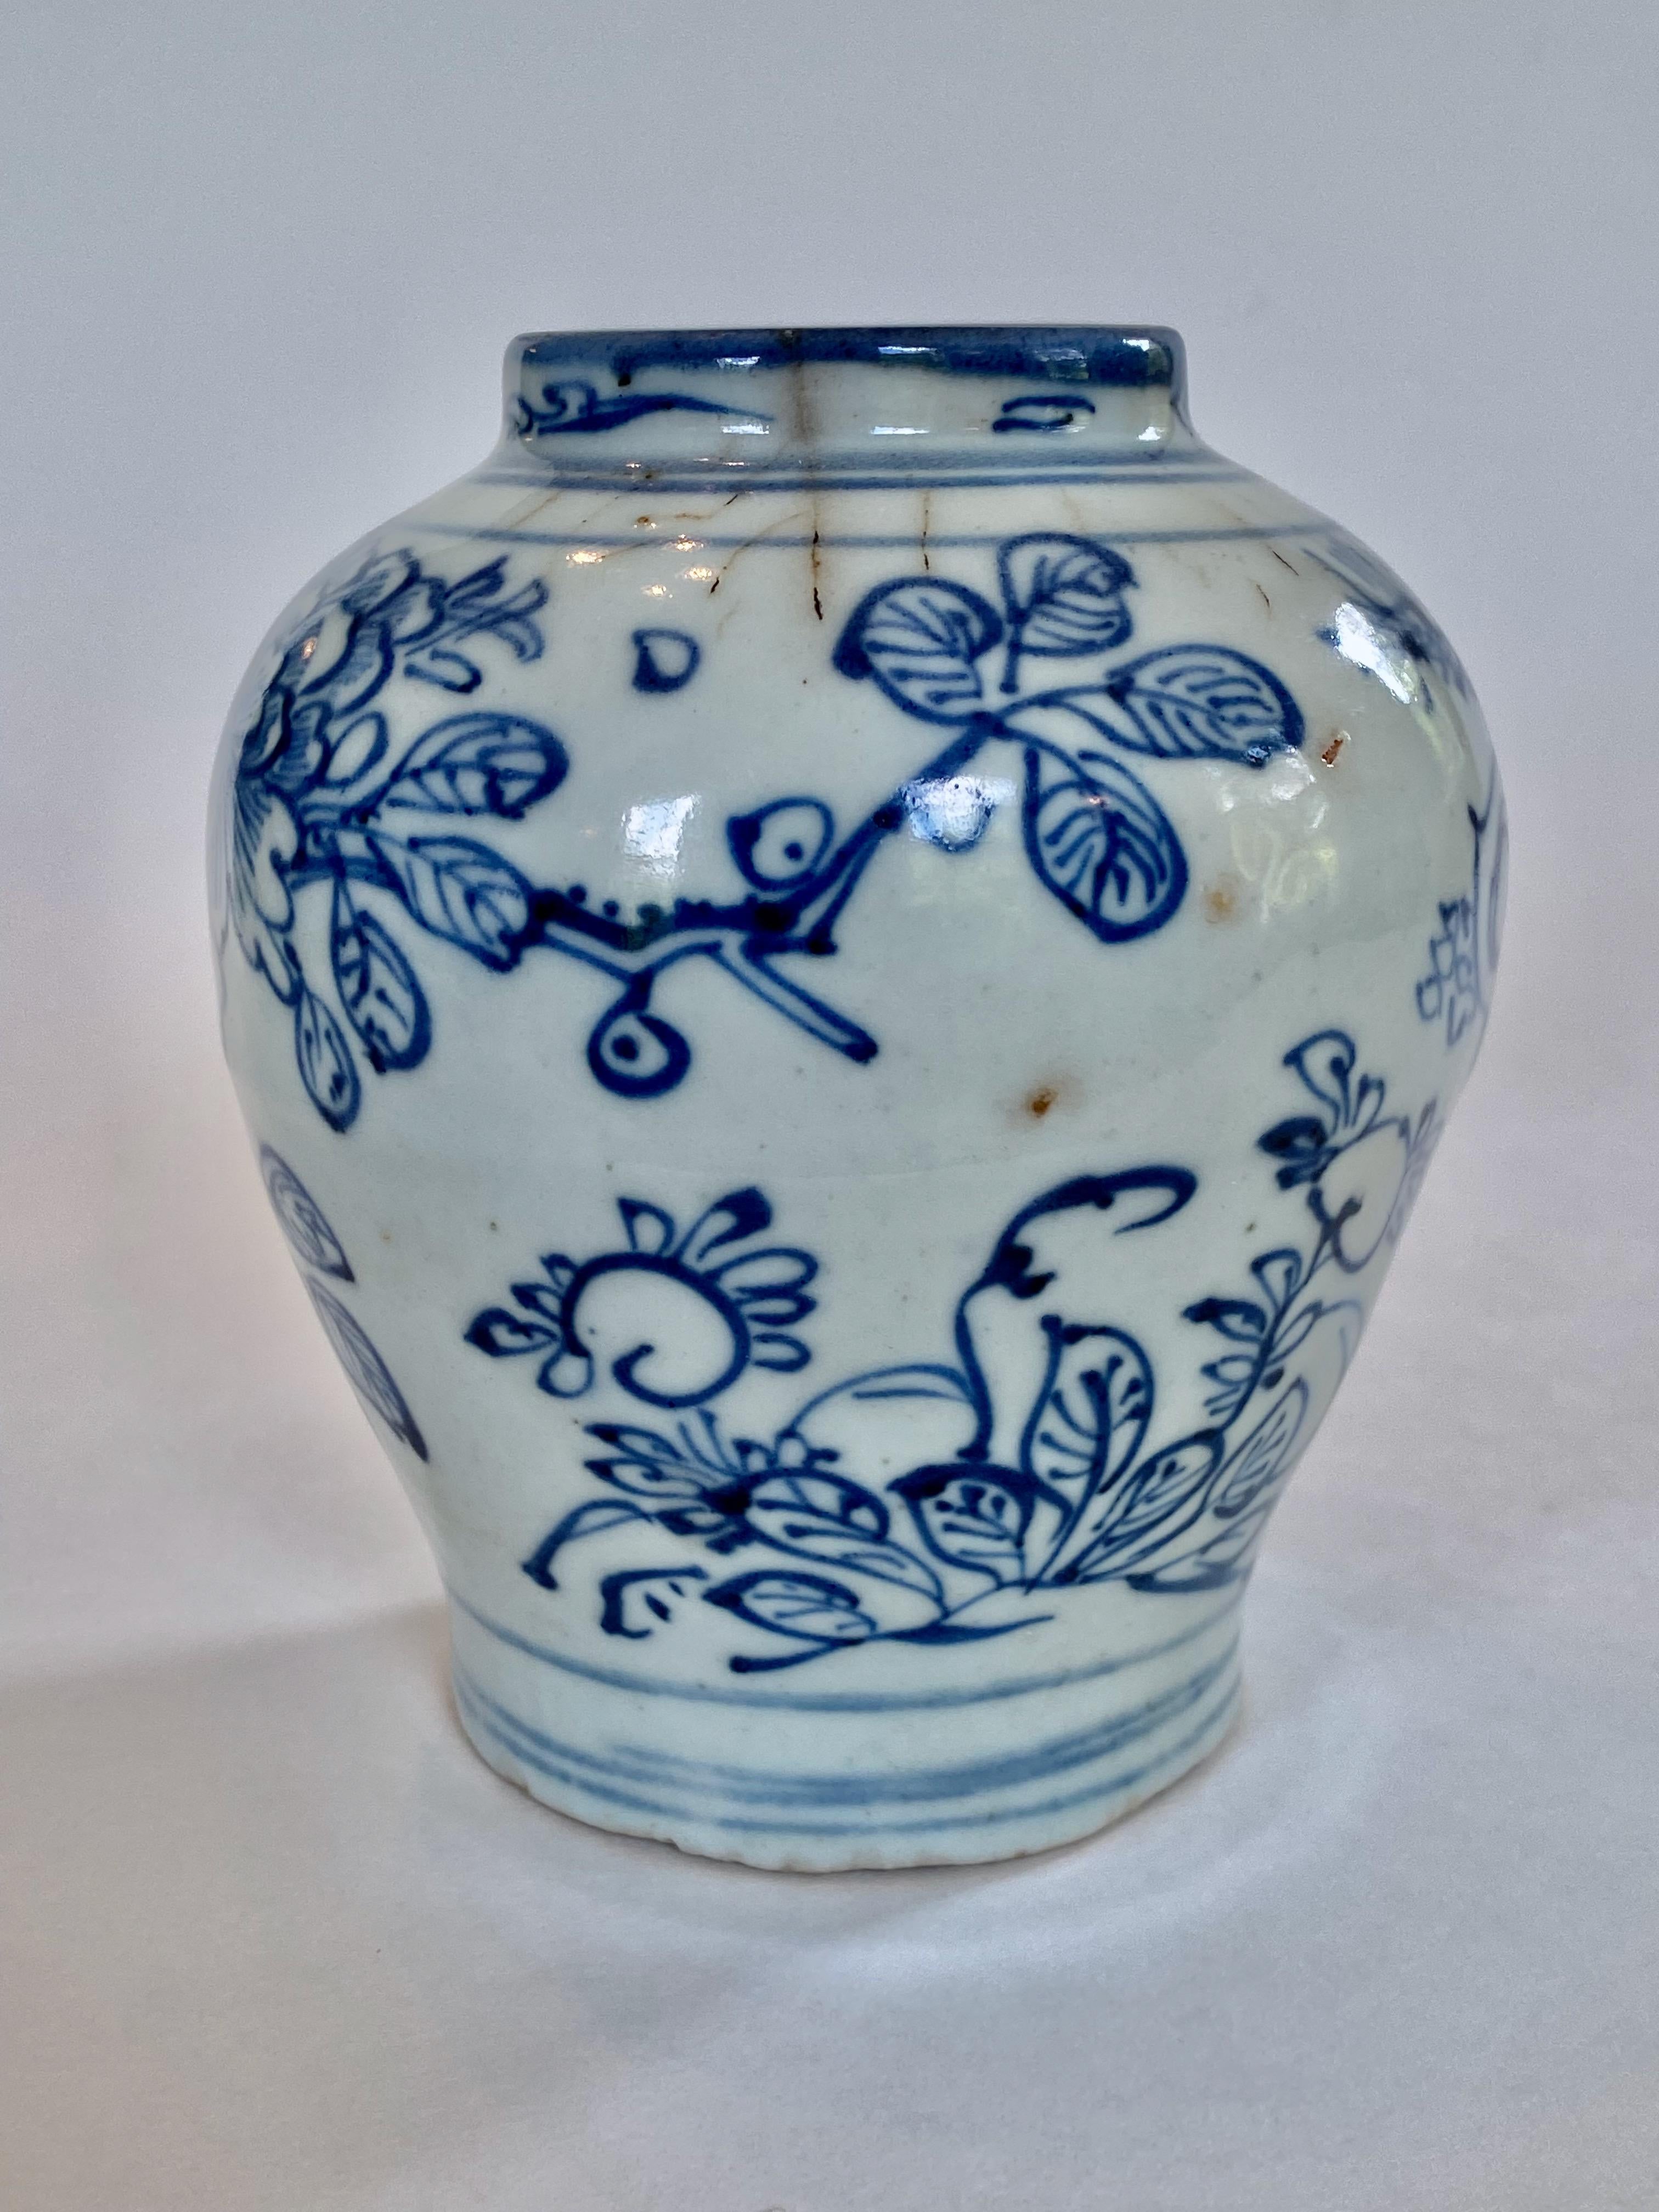 Ming Dynasty blue and white porcelain vase from the Wan Li period (1563-1620). This vase, drawn with a very free hand, is decorated with a branch of flowering peonies as well as the sacred lingzhi mushroom, which symbolizes long life. The sacred